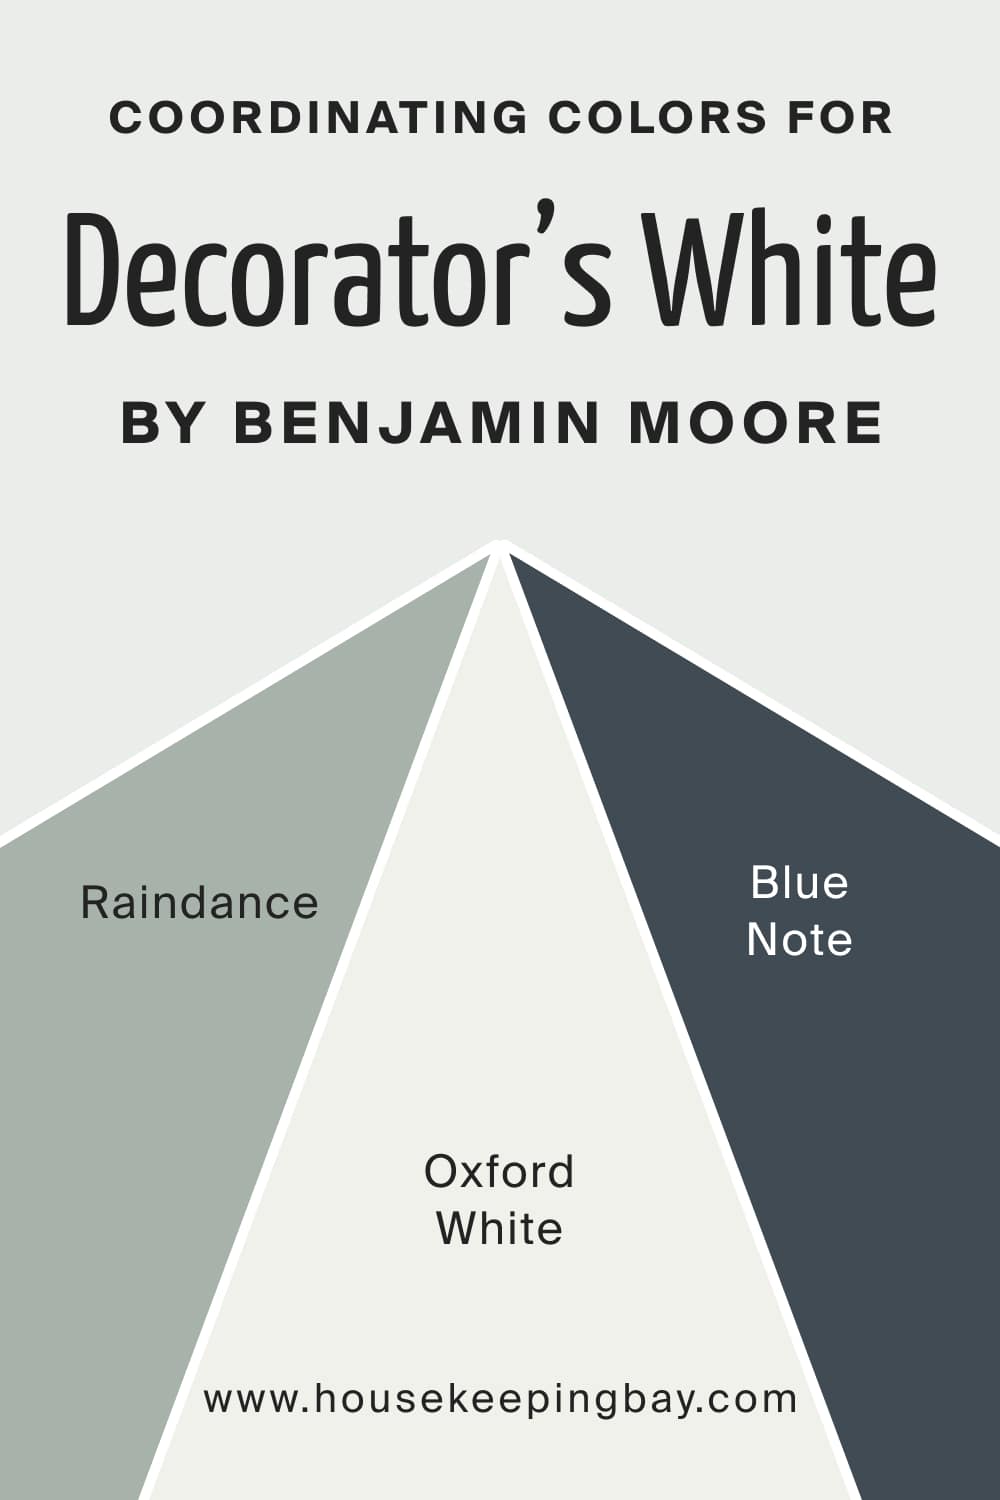 Coordinating Colors for Decorator’s White CC 20 by Benjamin Moore